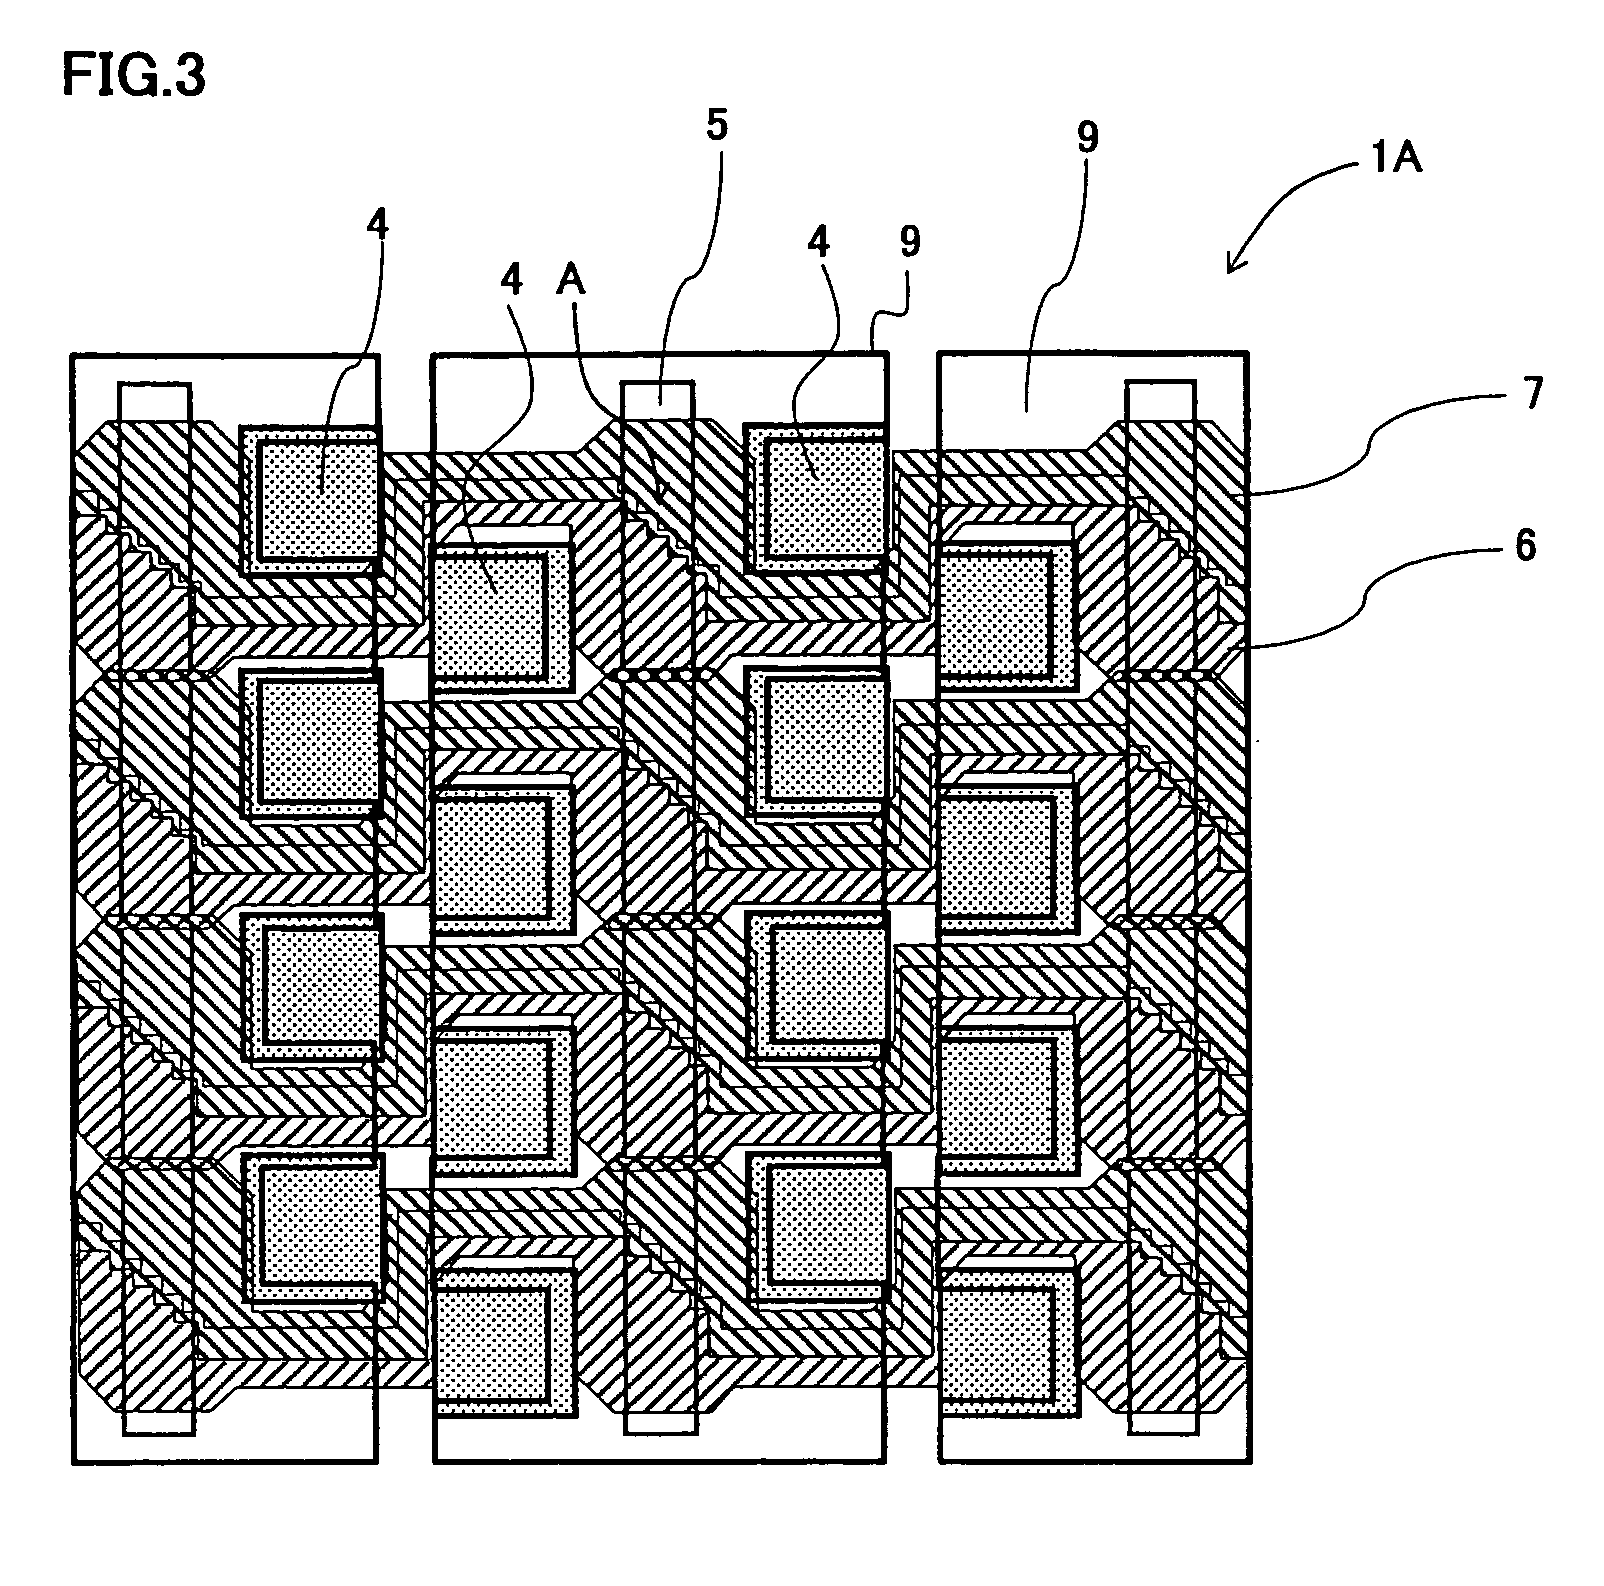 Solid-state image capturing apparatus